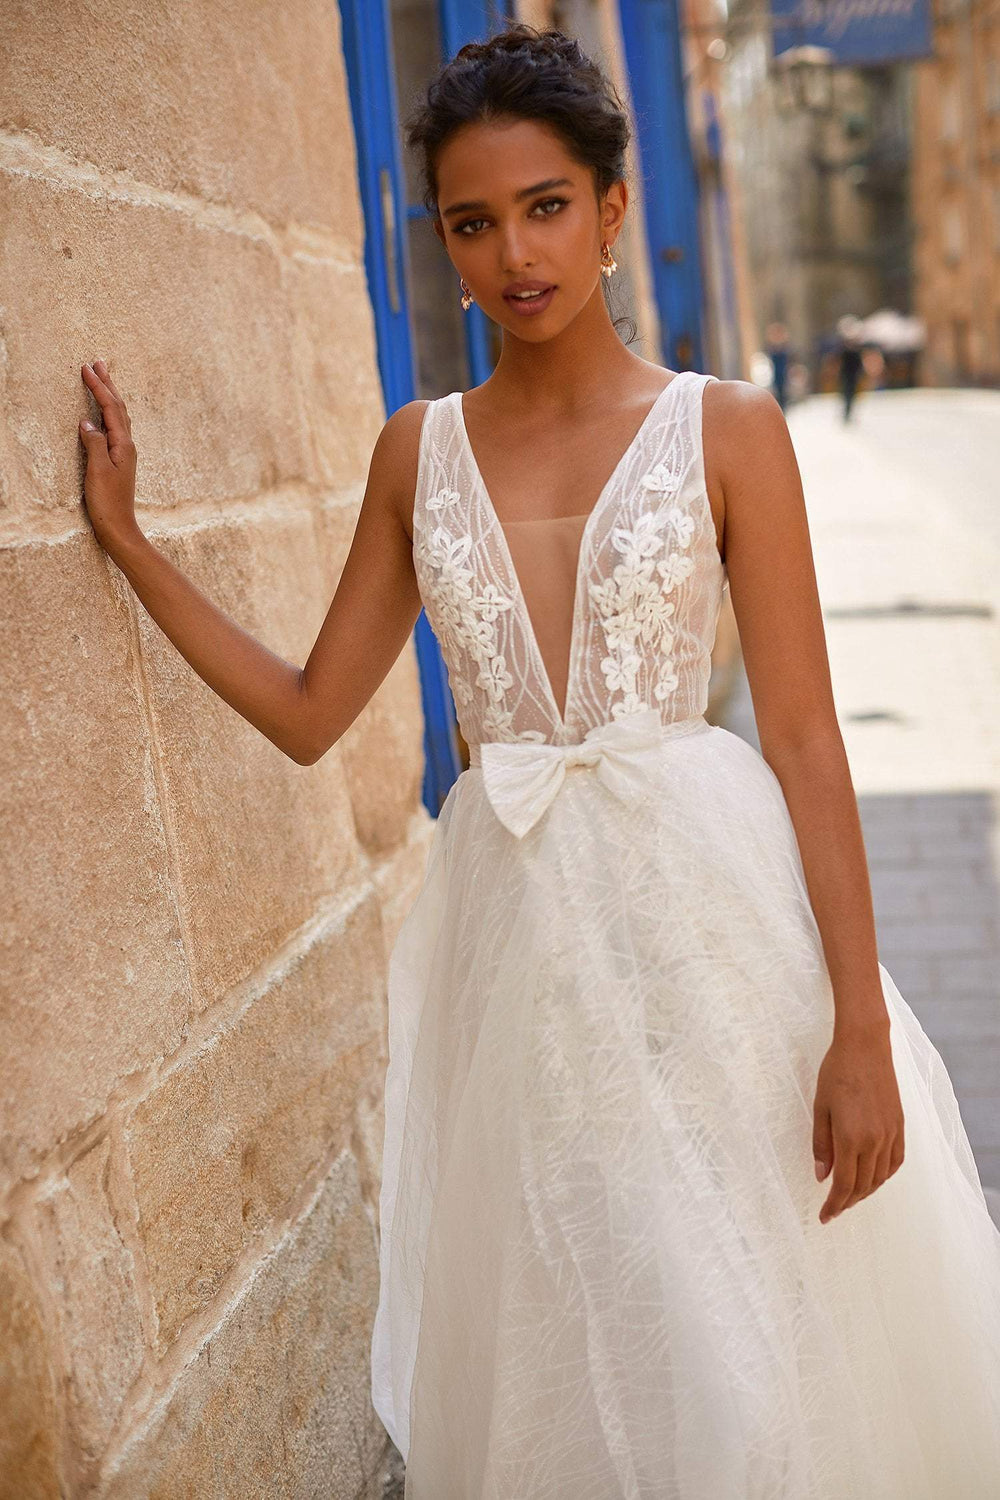 A&N Martha - White Tulle Boho Bridal Gown with Plunge Neck